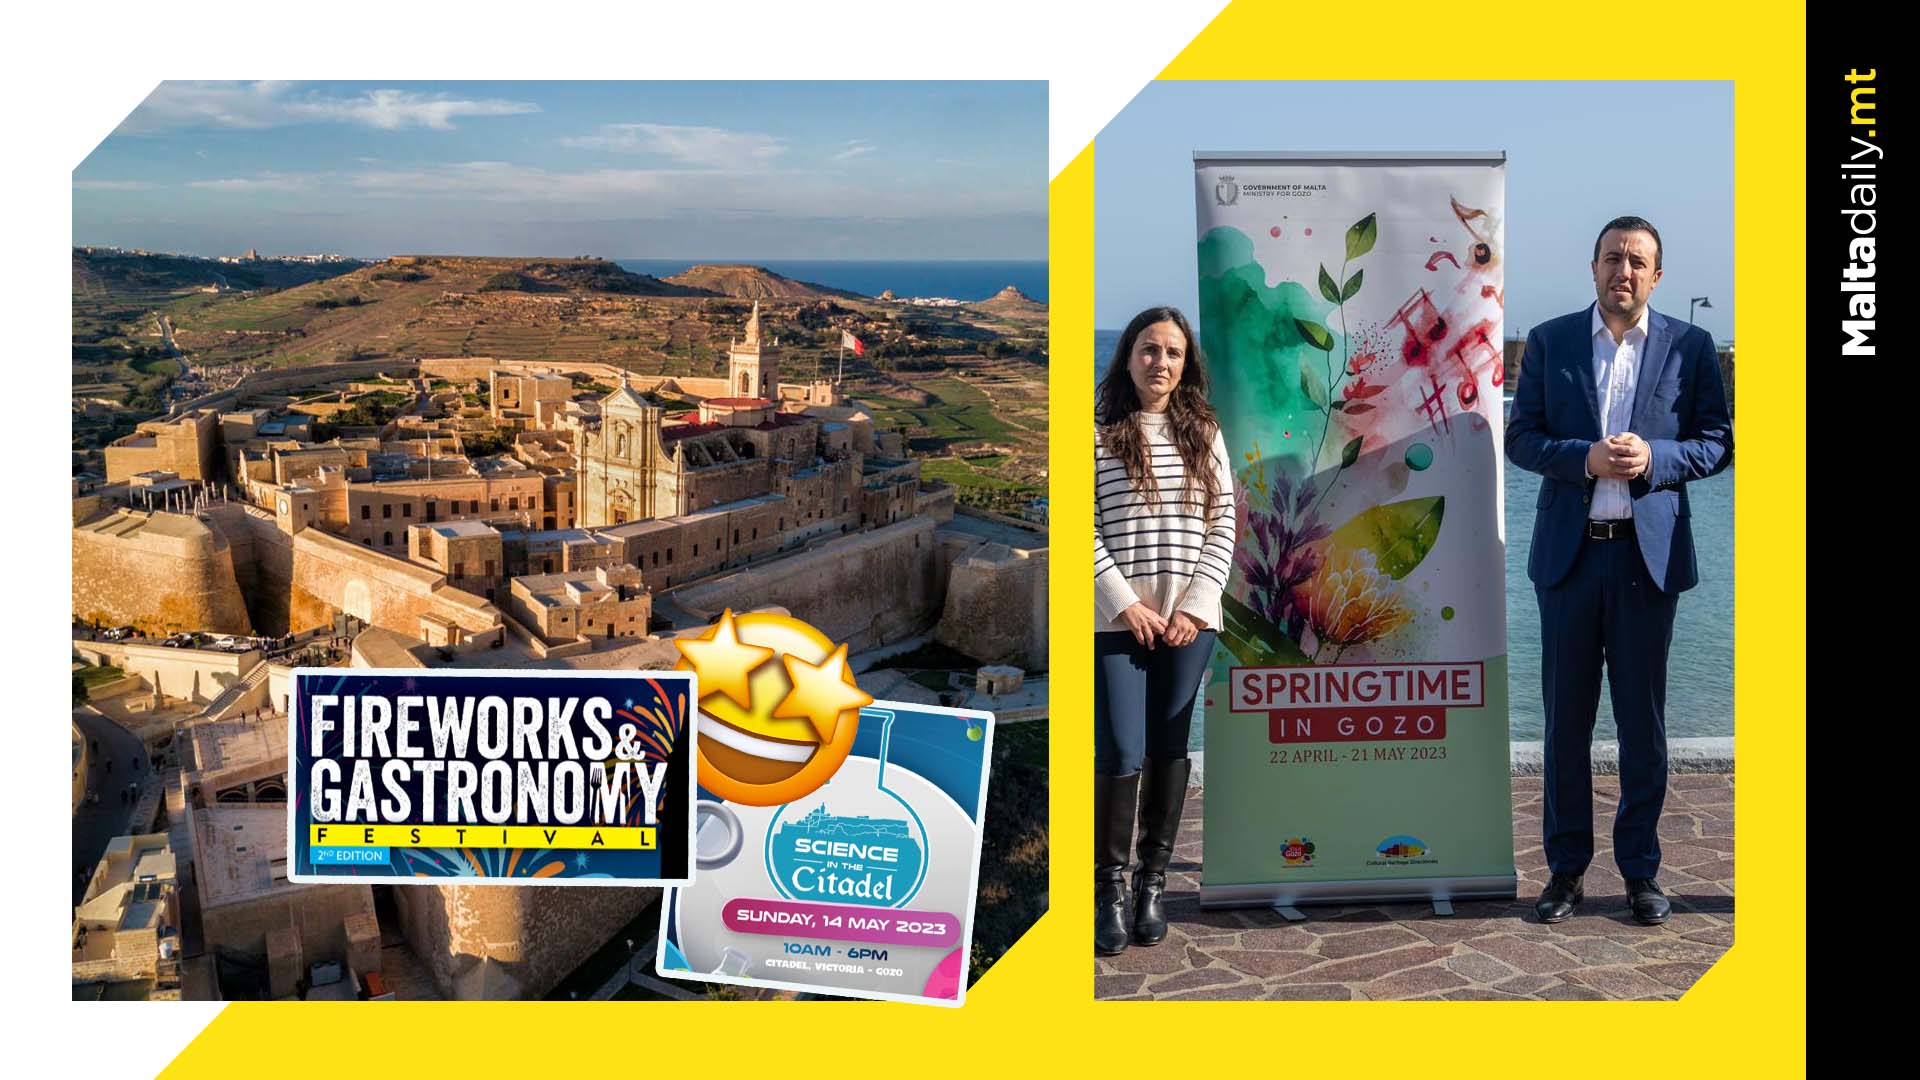 Gozo is the place to be this spring: event calendar launch